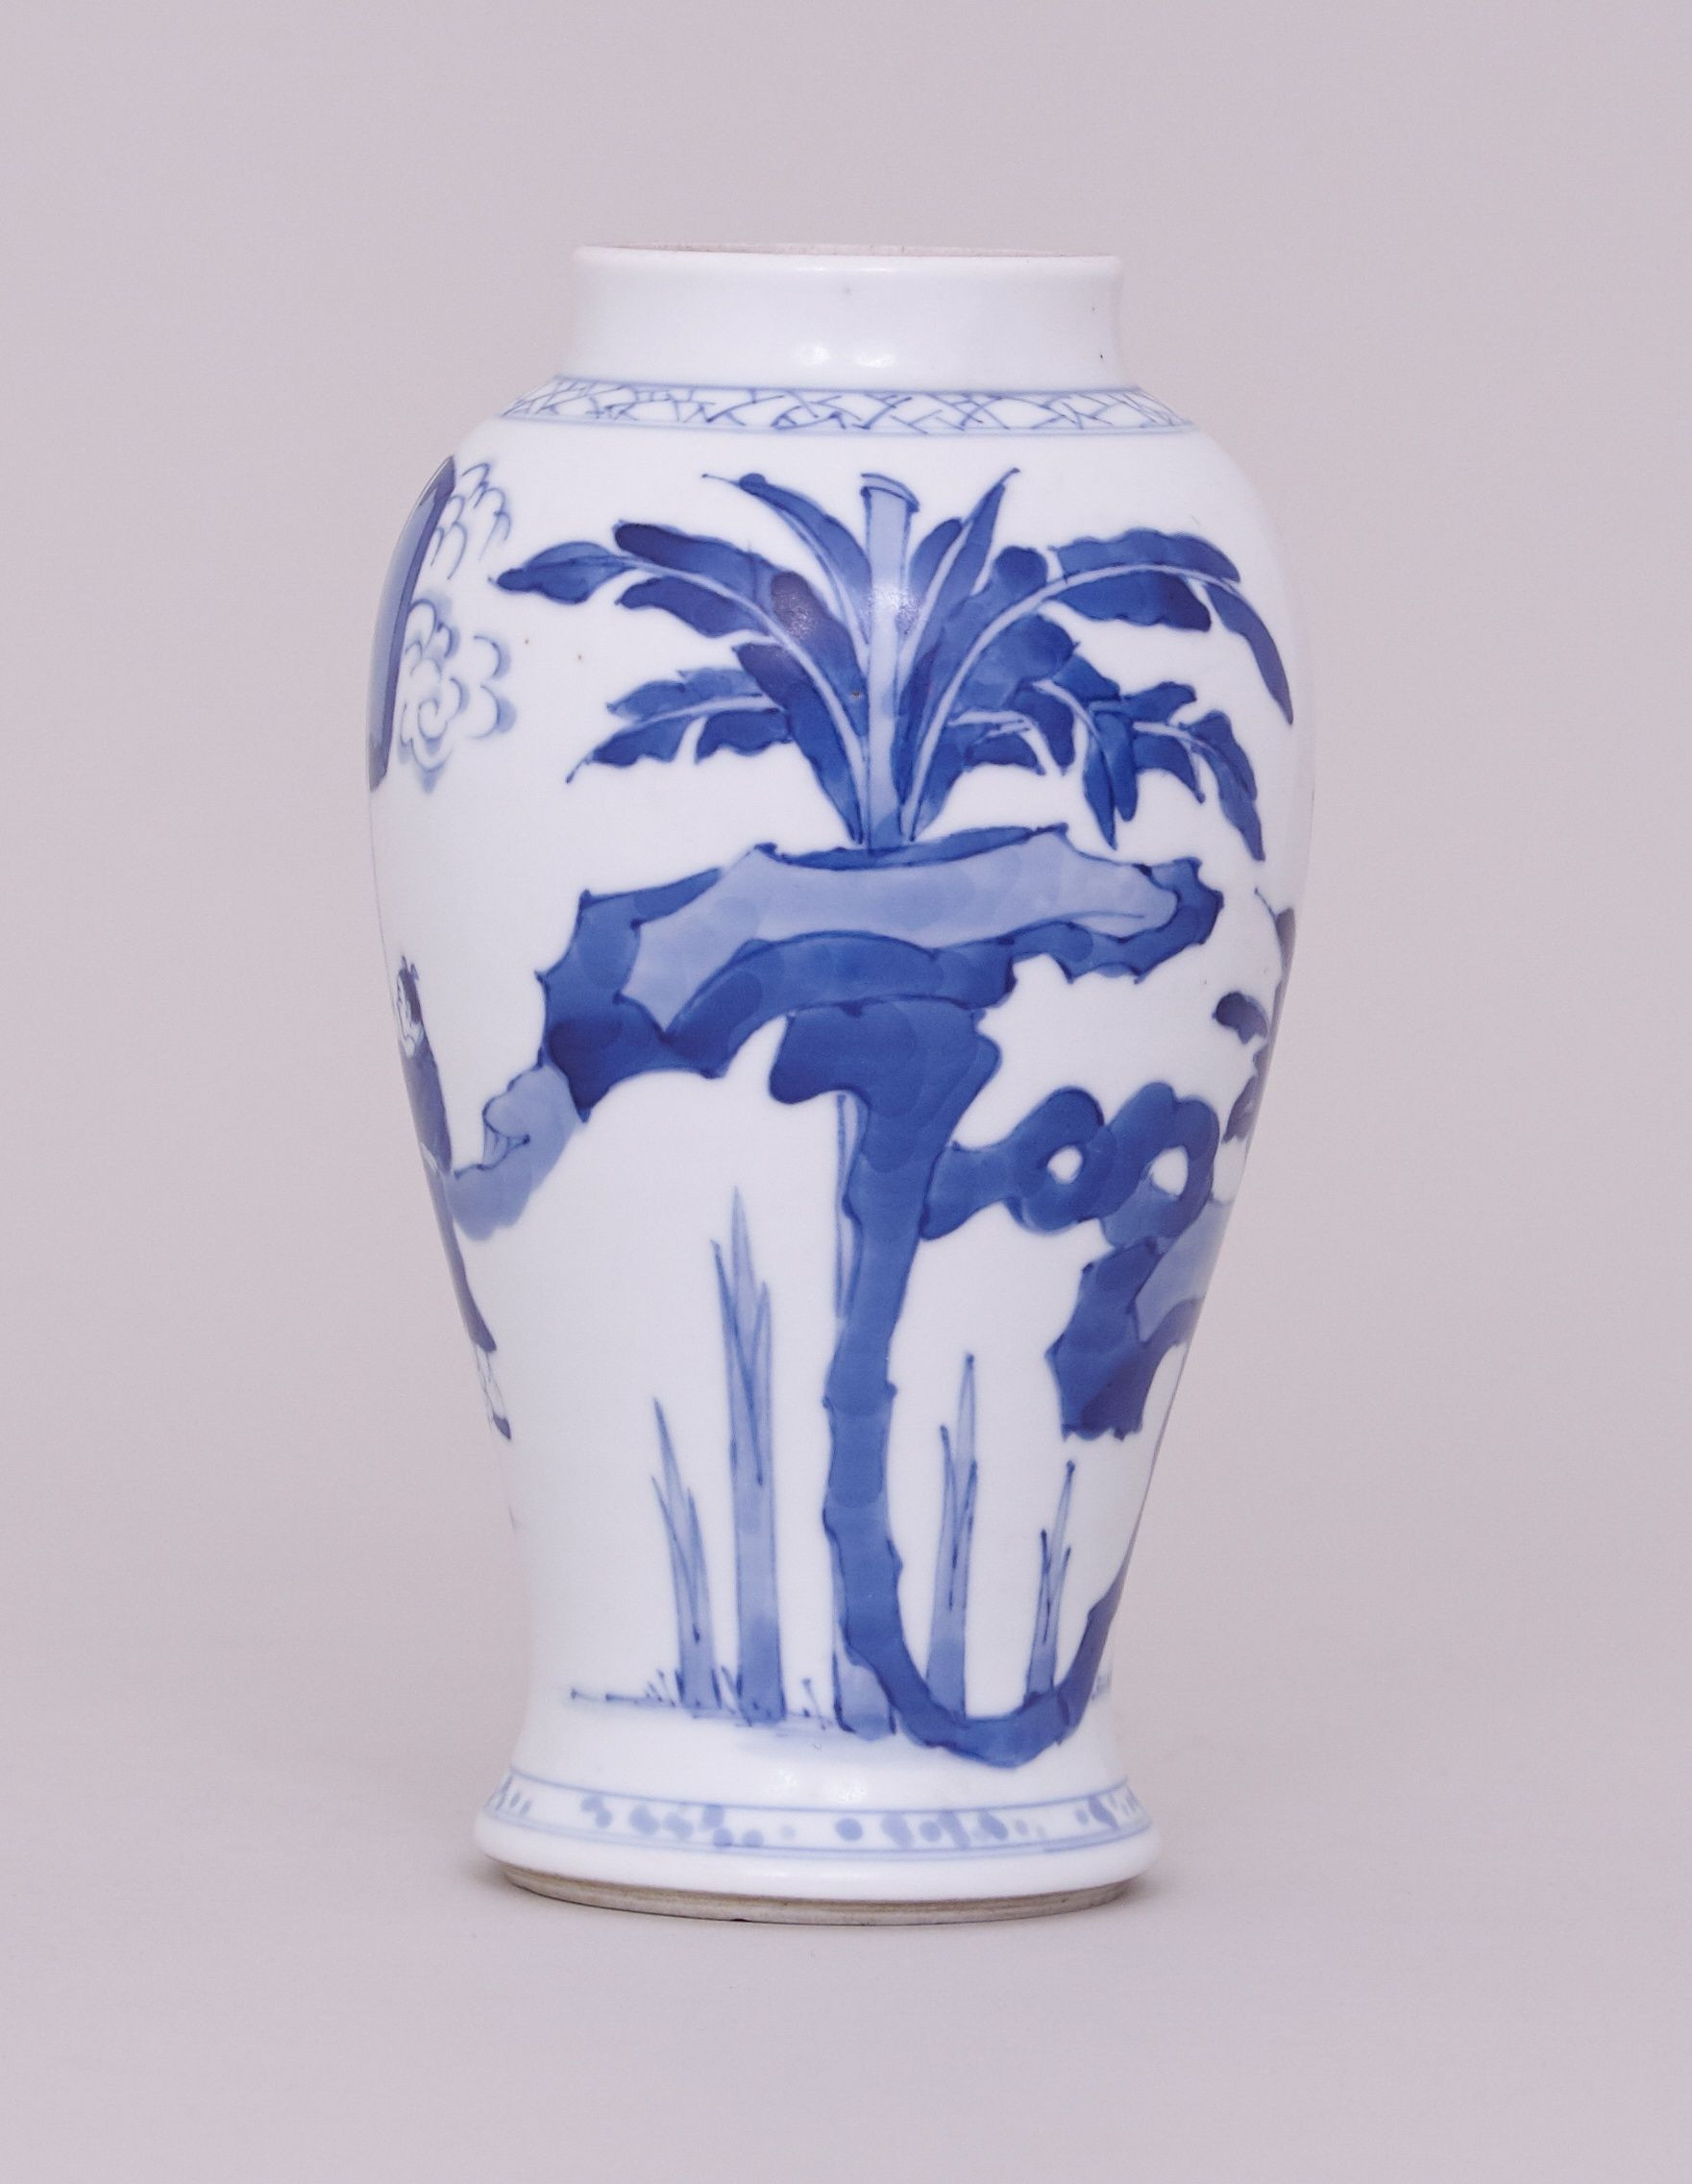 28 Perfect asian Porcelain Vases 2024 free download asian porcelain vases of blue white vase lovely a chinese blue and white vase kangxi 1662 intended for blue white vase lovely a chinese blue and white vase kangxi 1662 1722